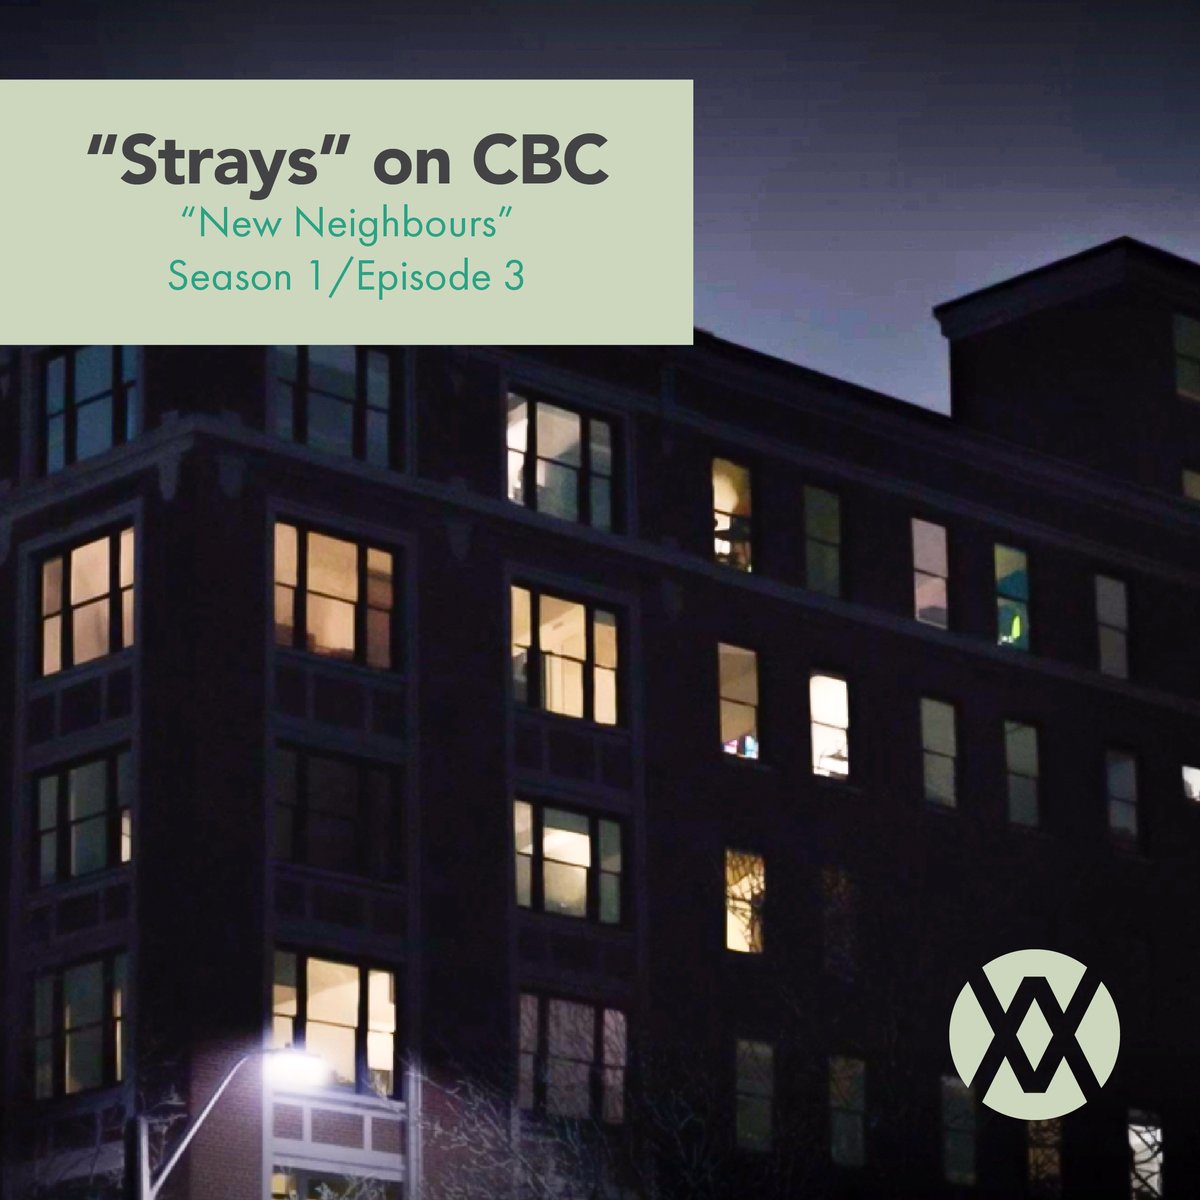 Spotted on screen: Westinghouse HQ 🎬 Our building made a cameo in the @cbcgem series #straystvshow and if you look closely, you can even see Tyler waving in the window.